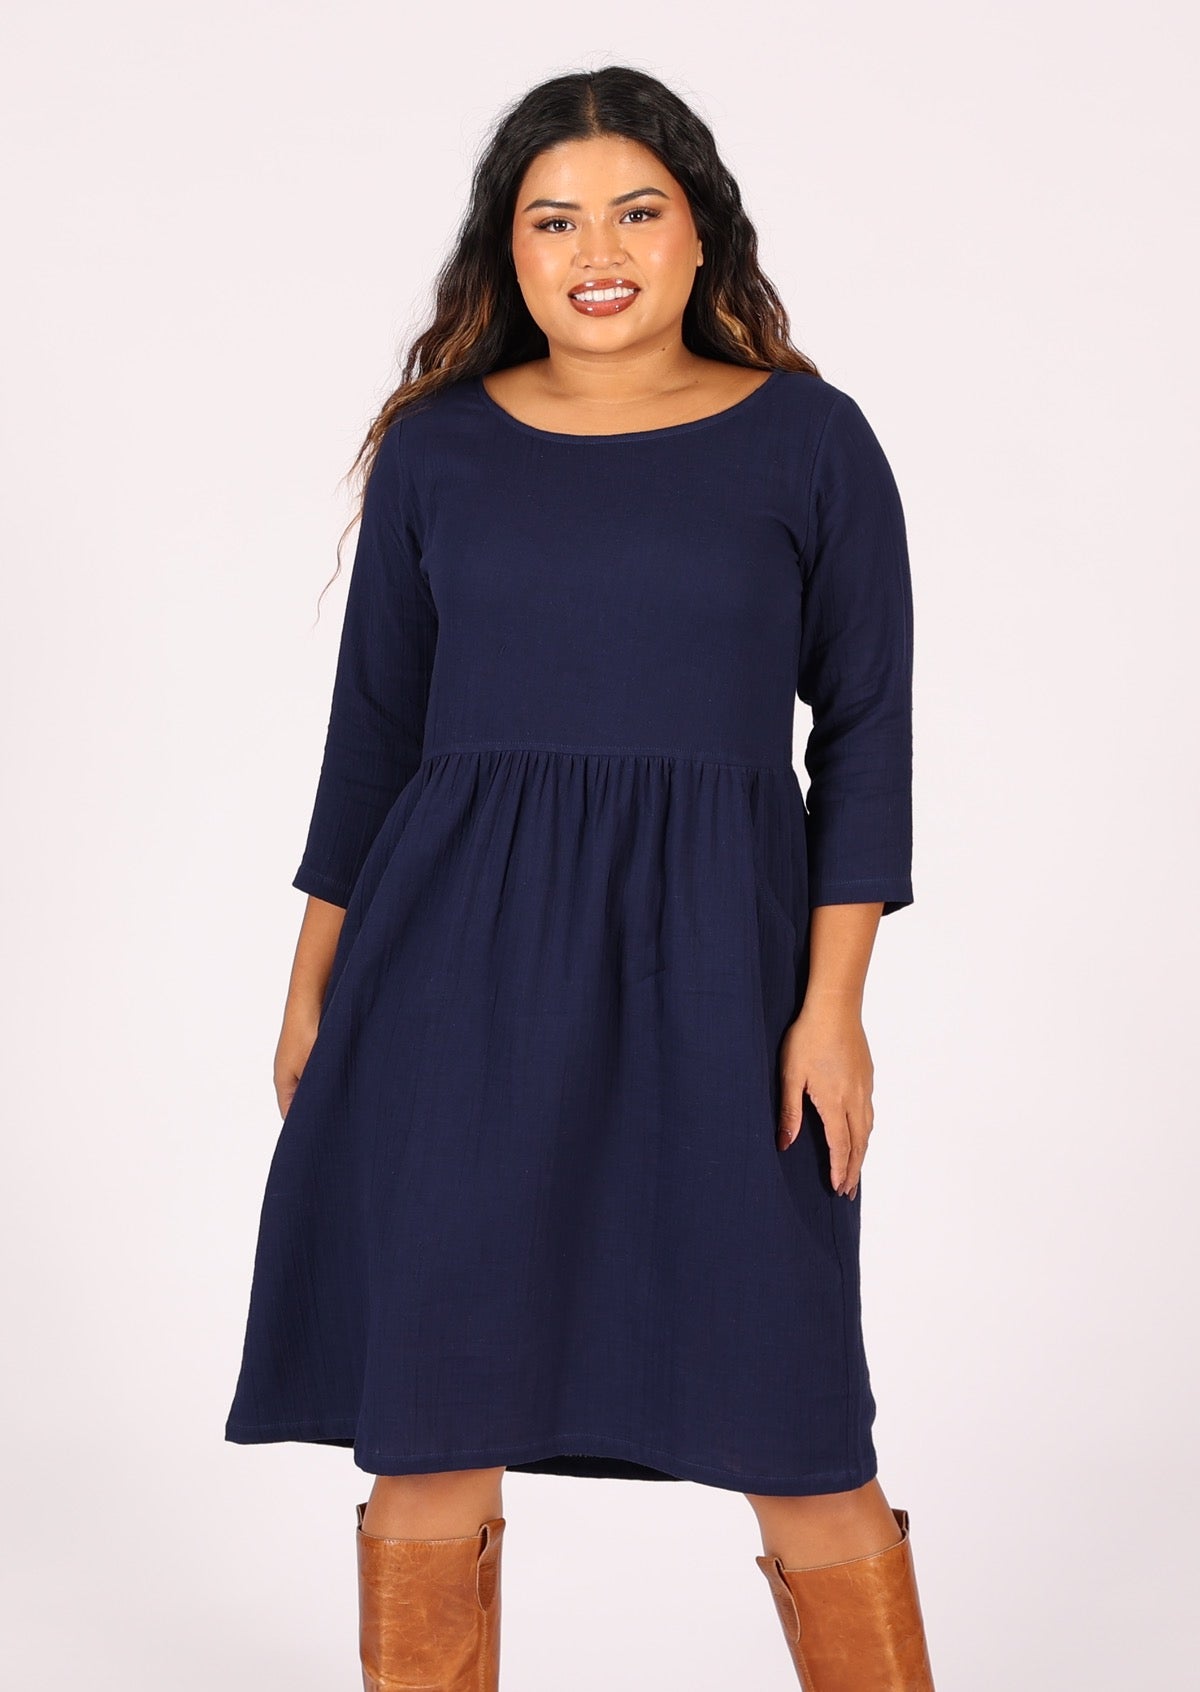 Cotton gauze dress with wide round neckline and 3/4 sleeves and relaxed fit waistline